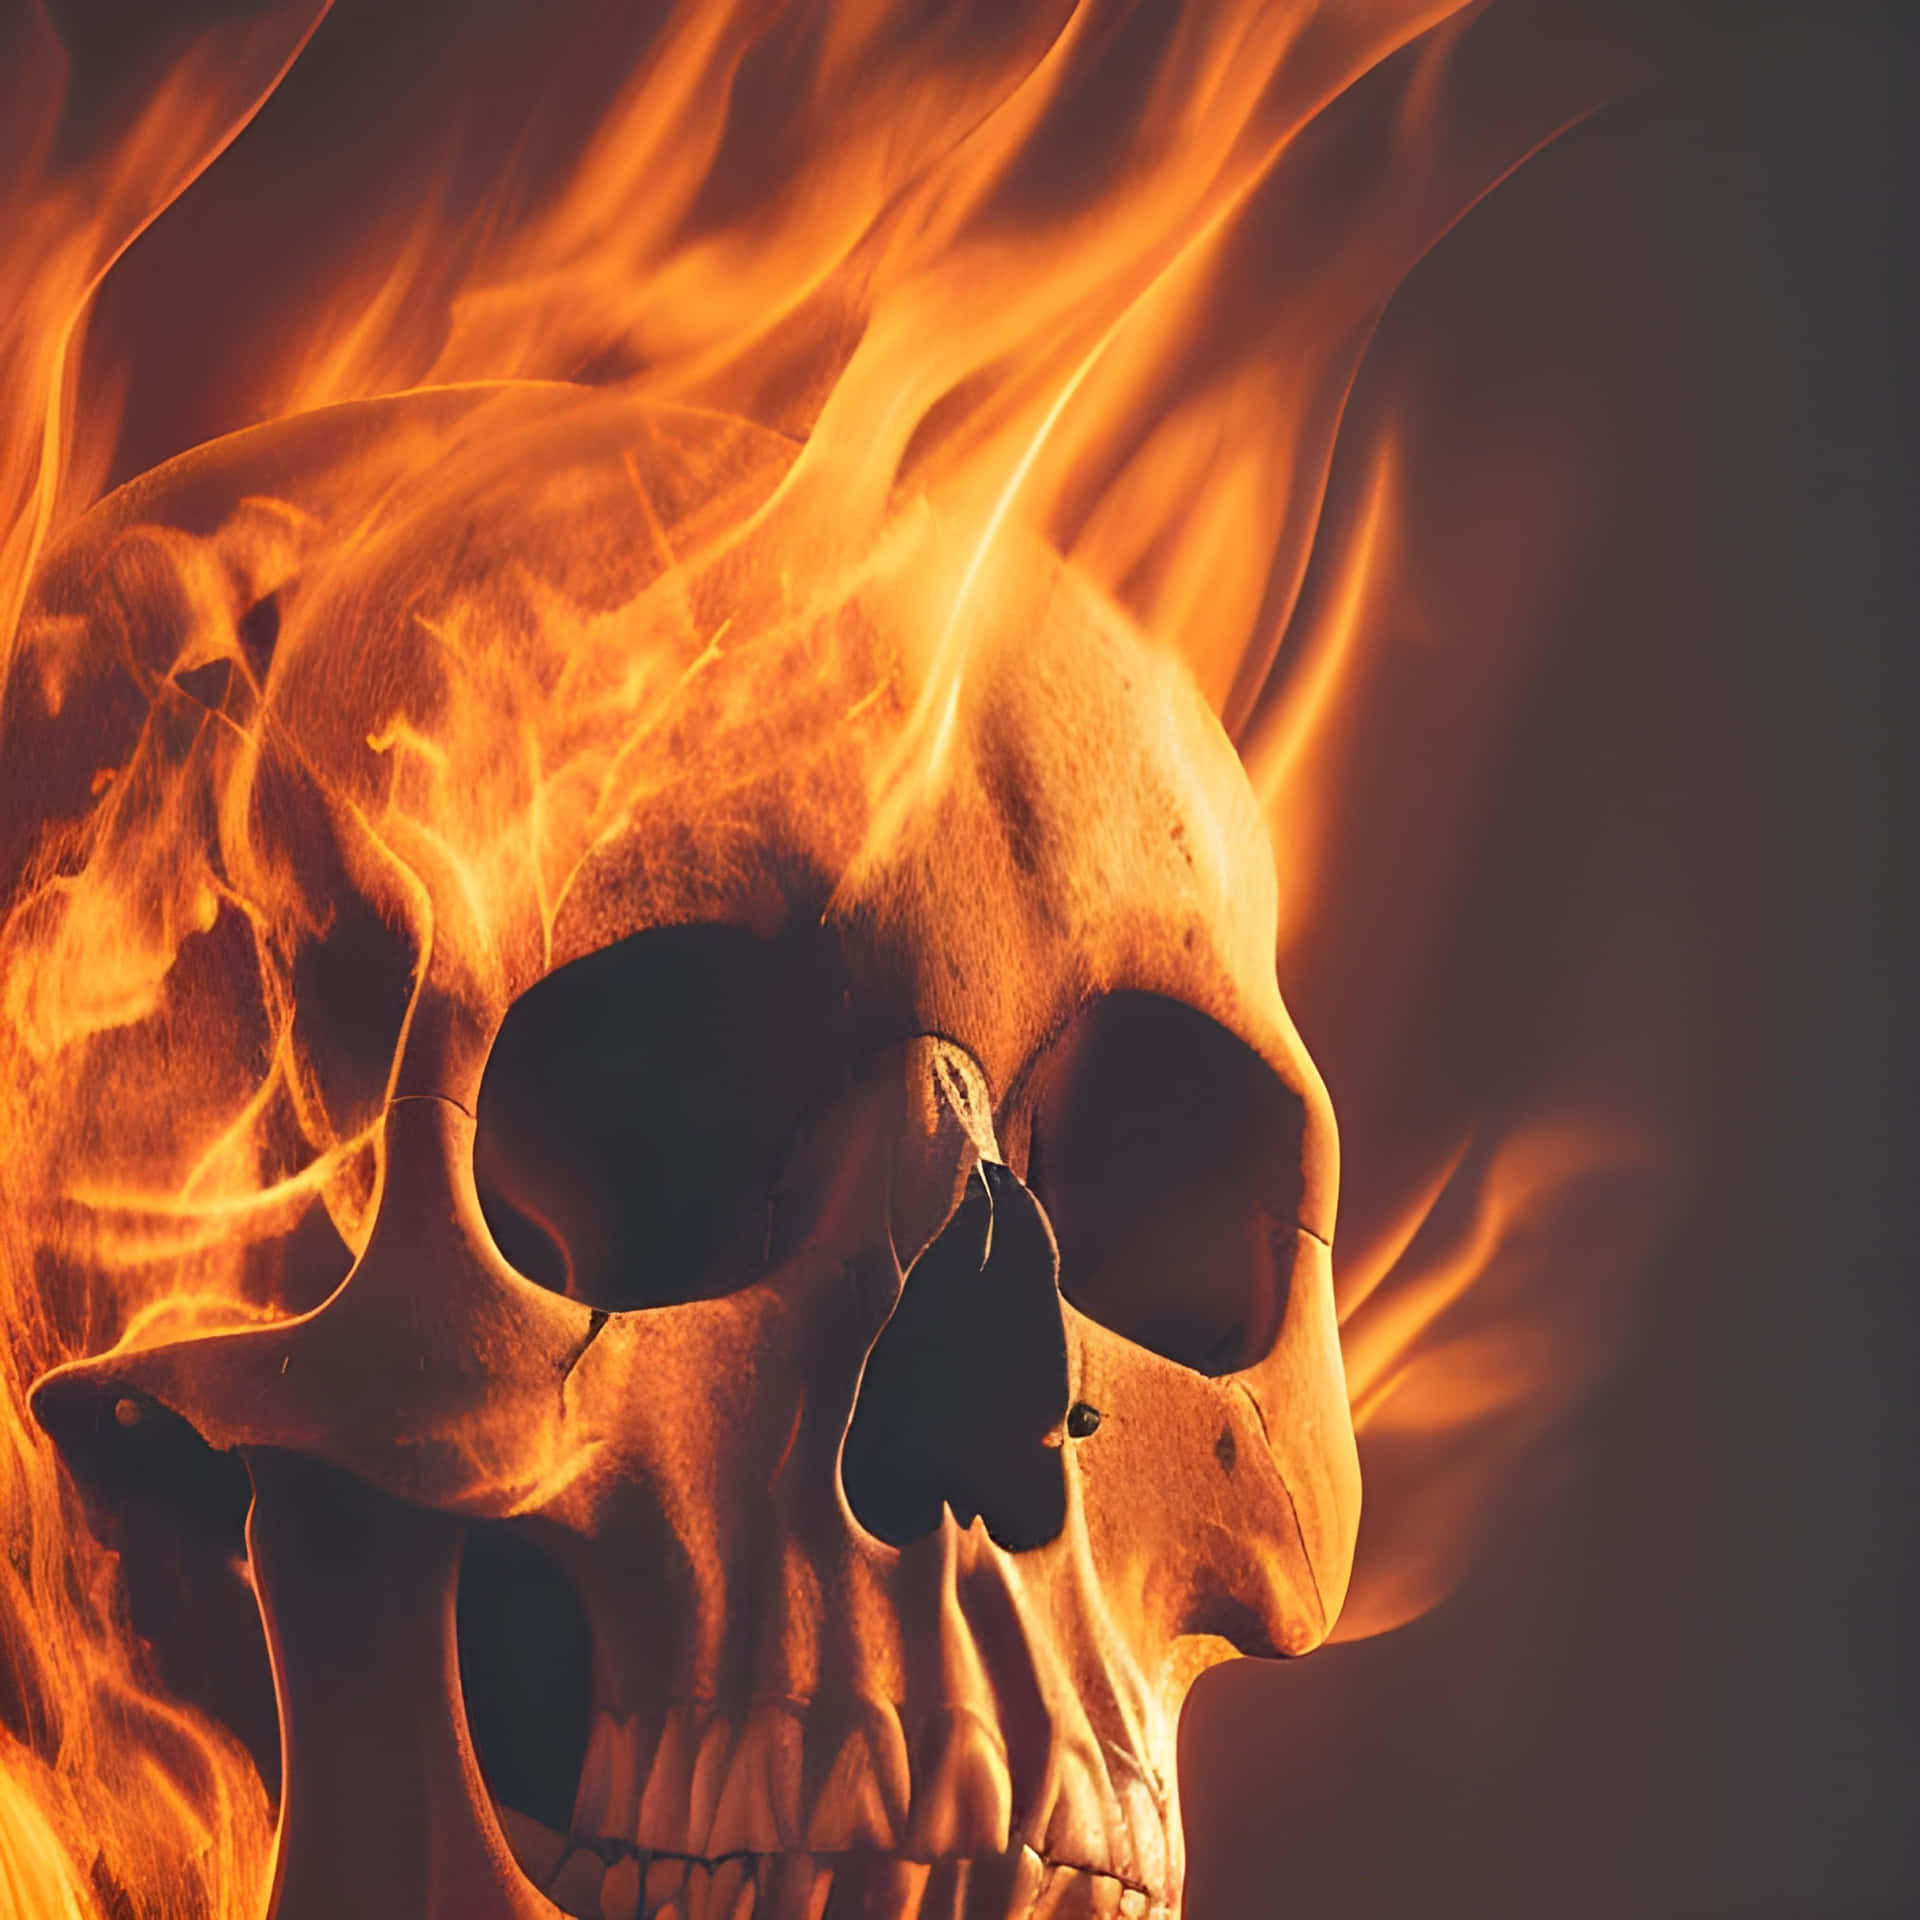 Skull engulfed in blazing red flames Wallpaper